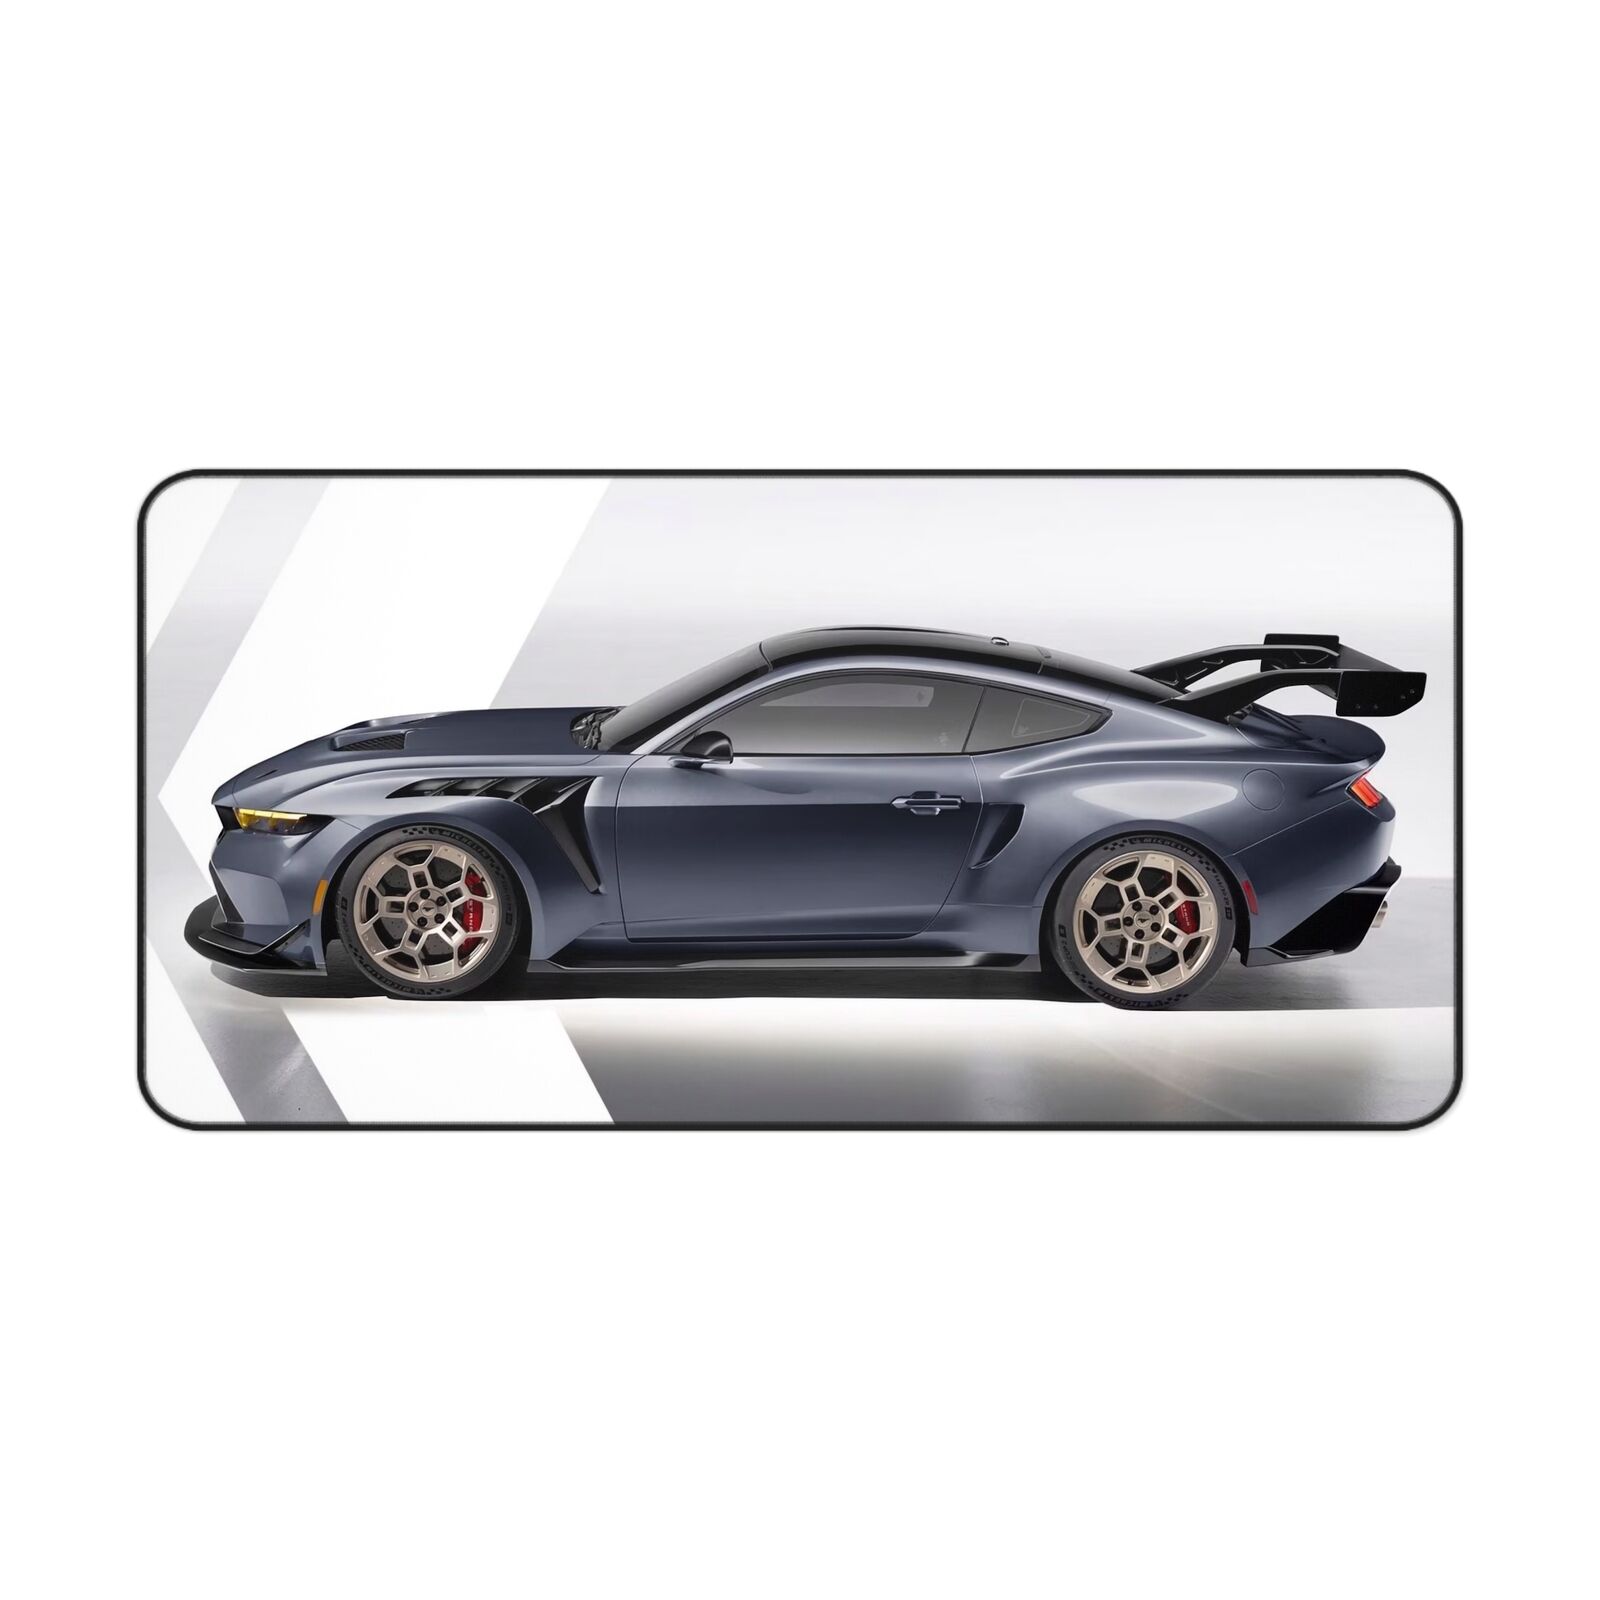 Ford Mustang GTD - Car Racing - 3 sizes available - Premium Desk Mat Mouse Pad